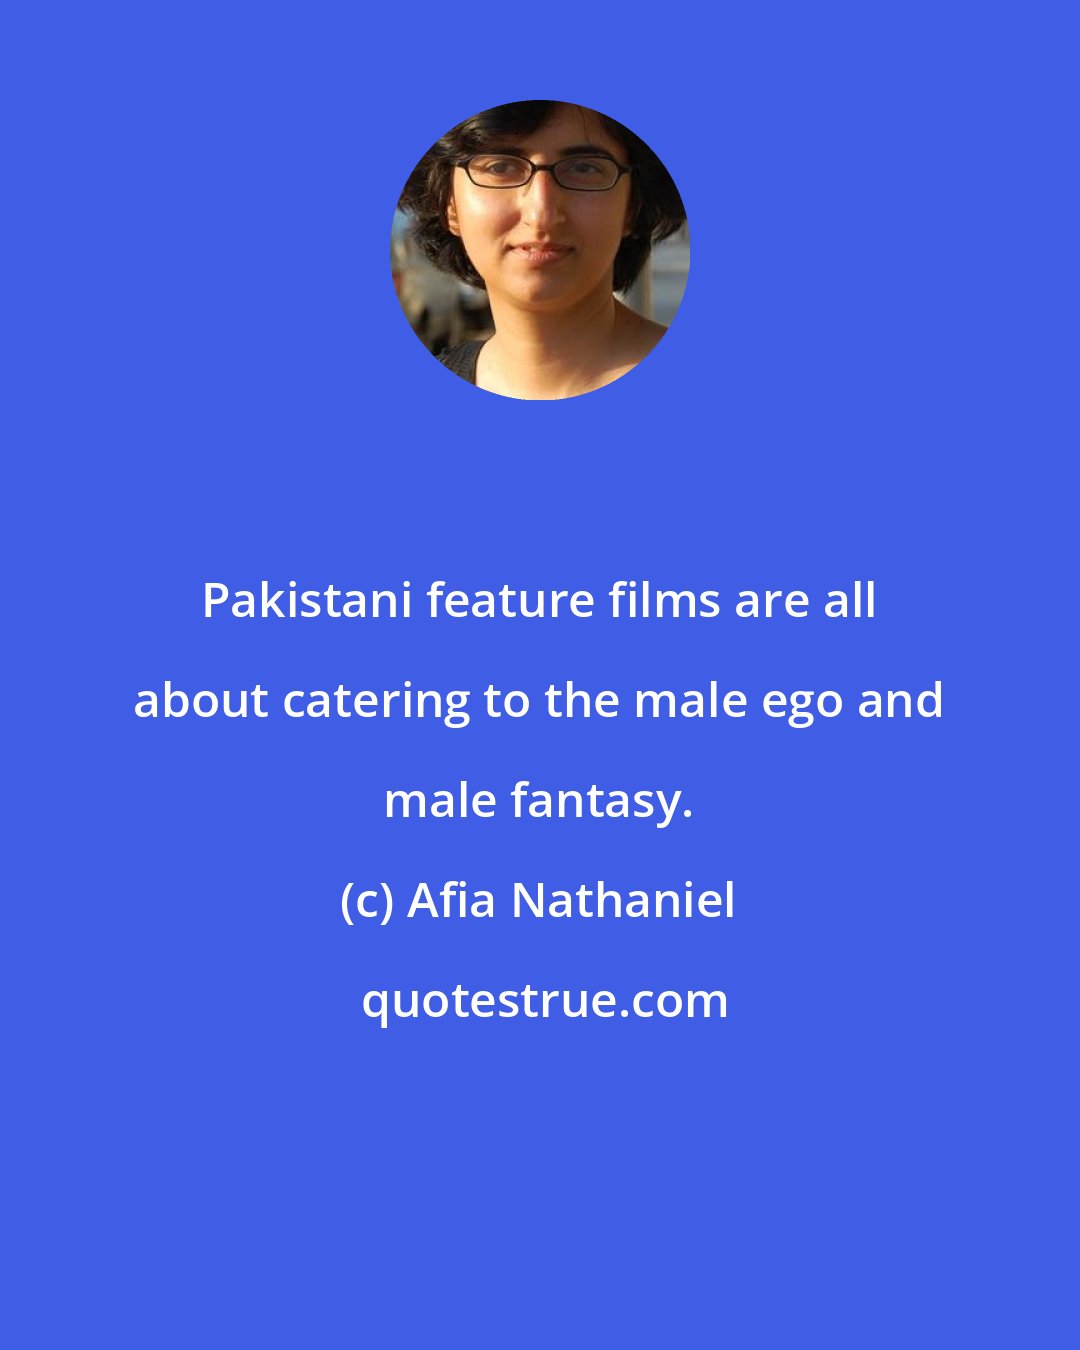 Afia Nathaniel: Pakistani feature films are all about catering to the male ego and male fantasy.